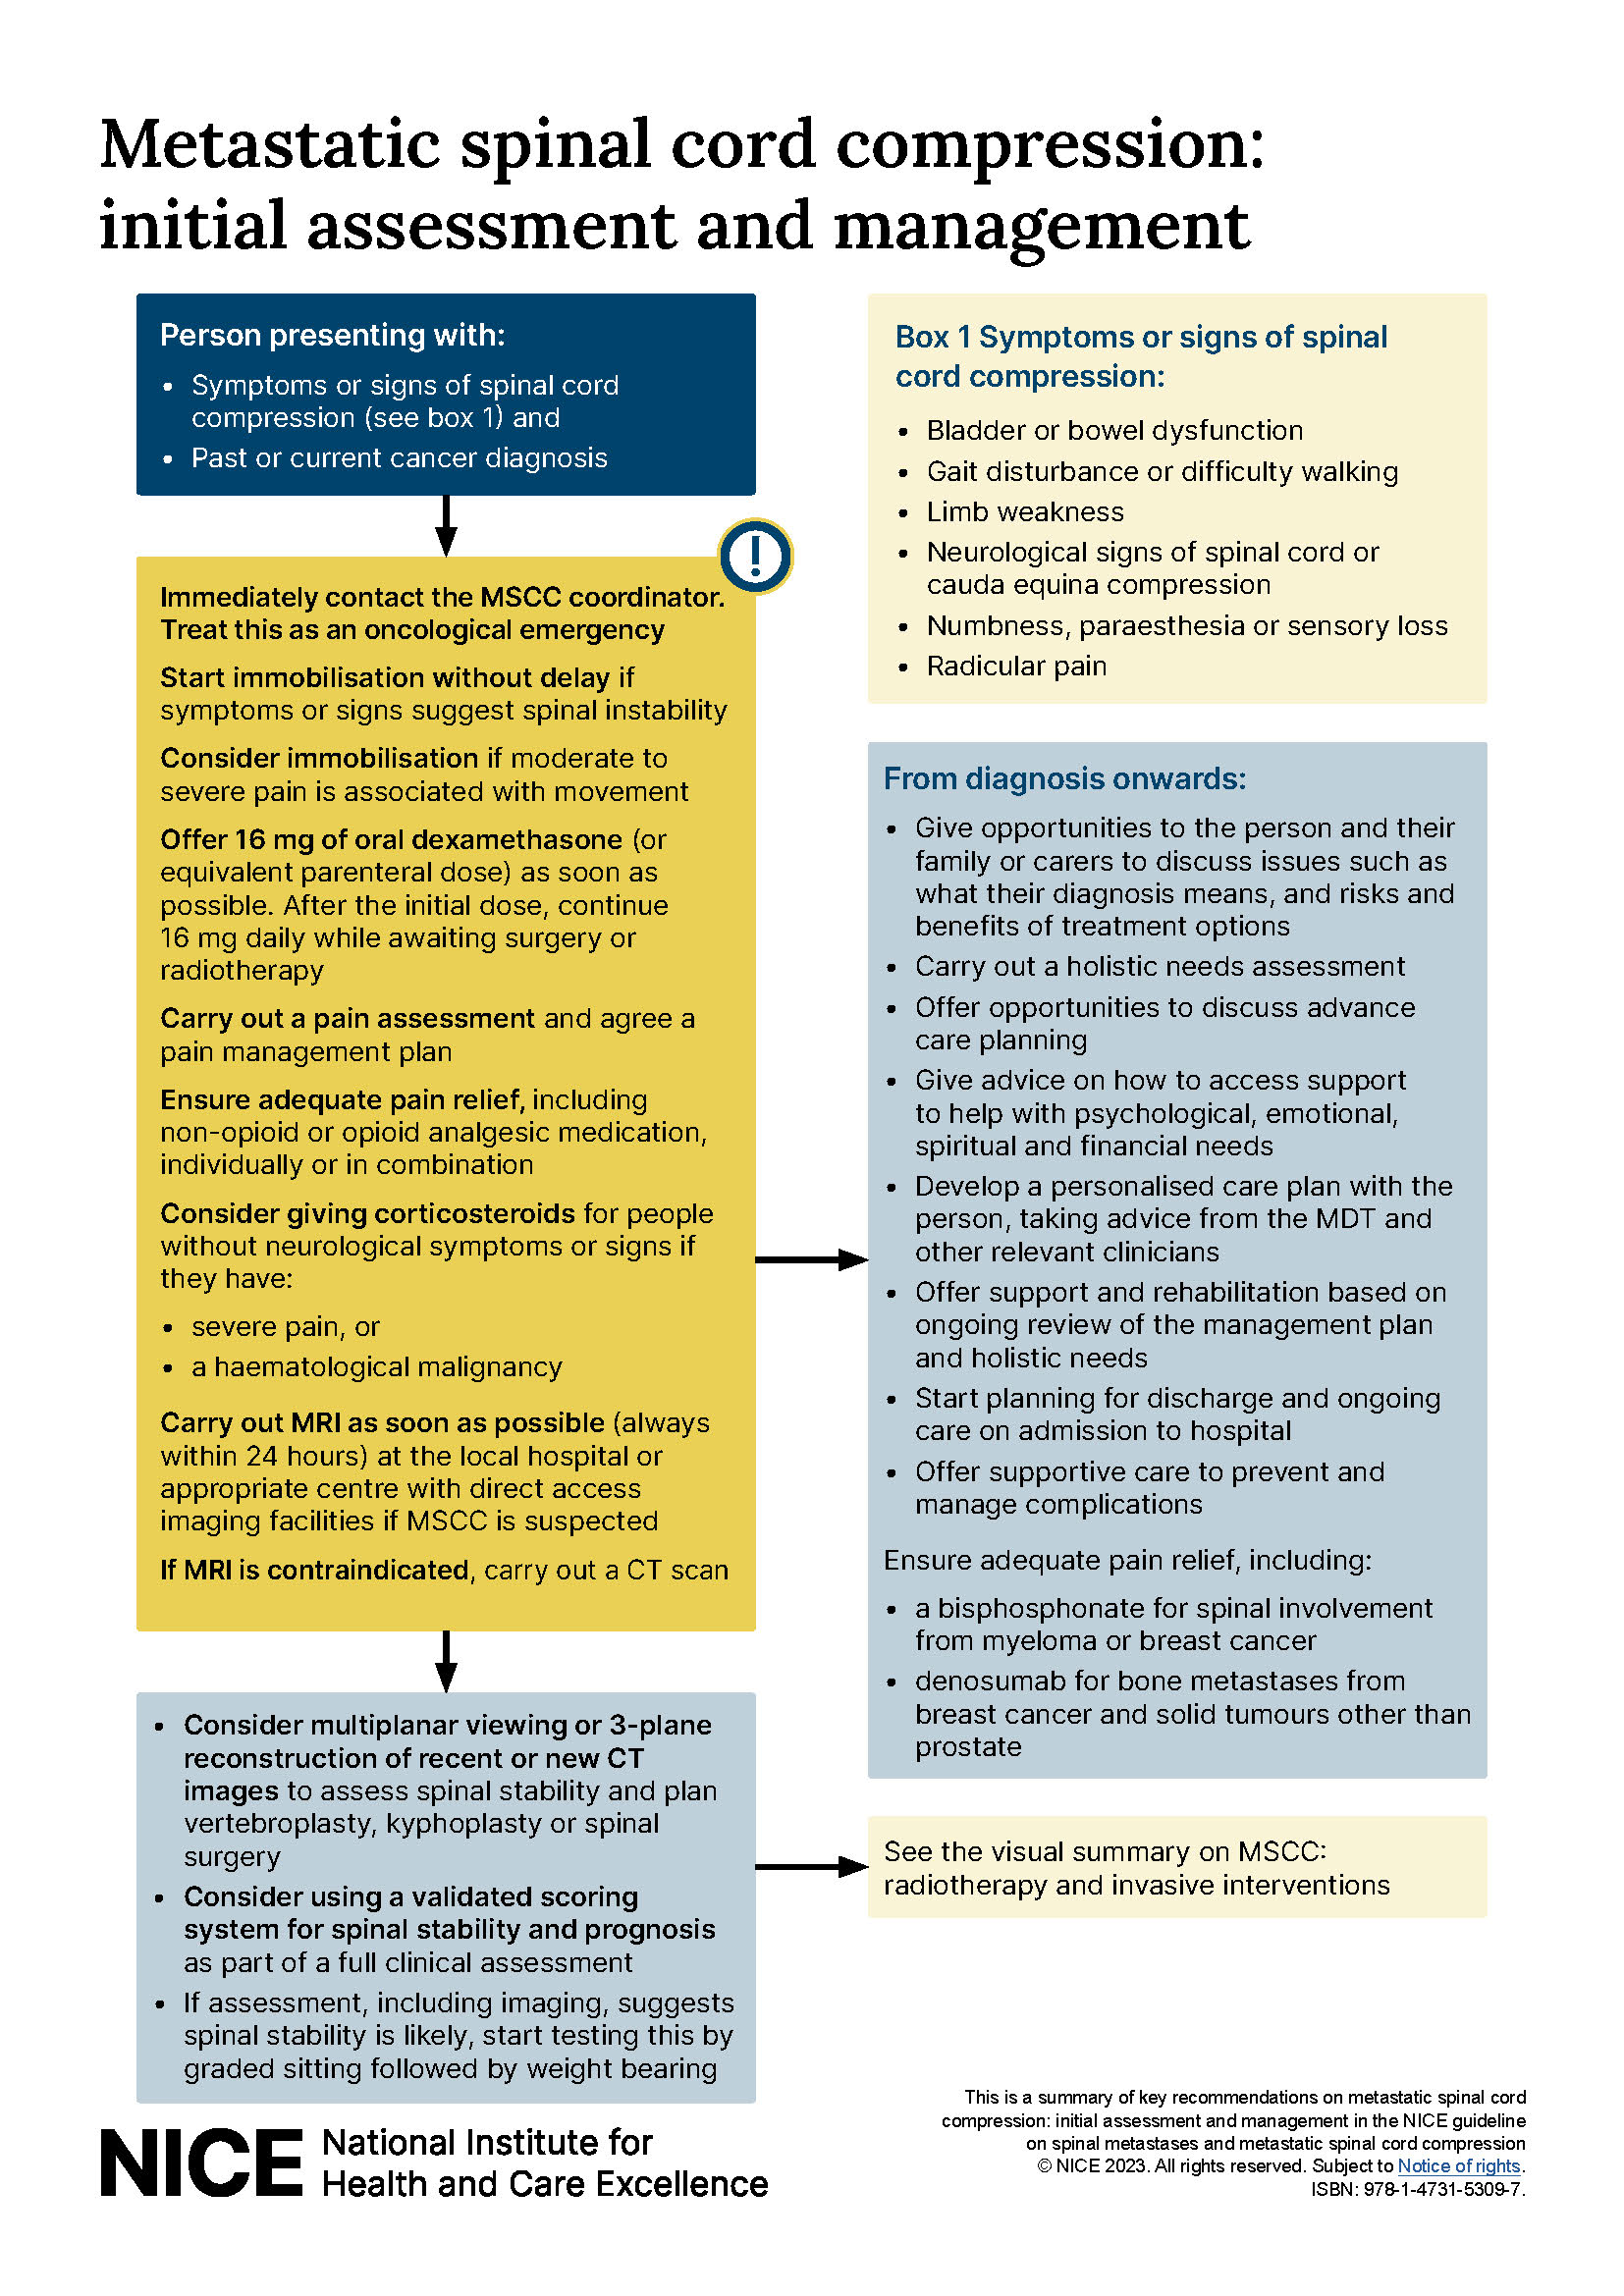 View visual summary on metastatic spinal cord compression: initial assessment and management